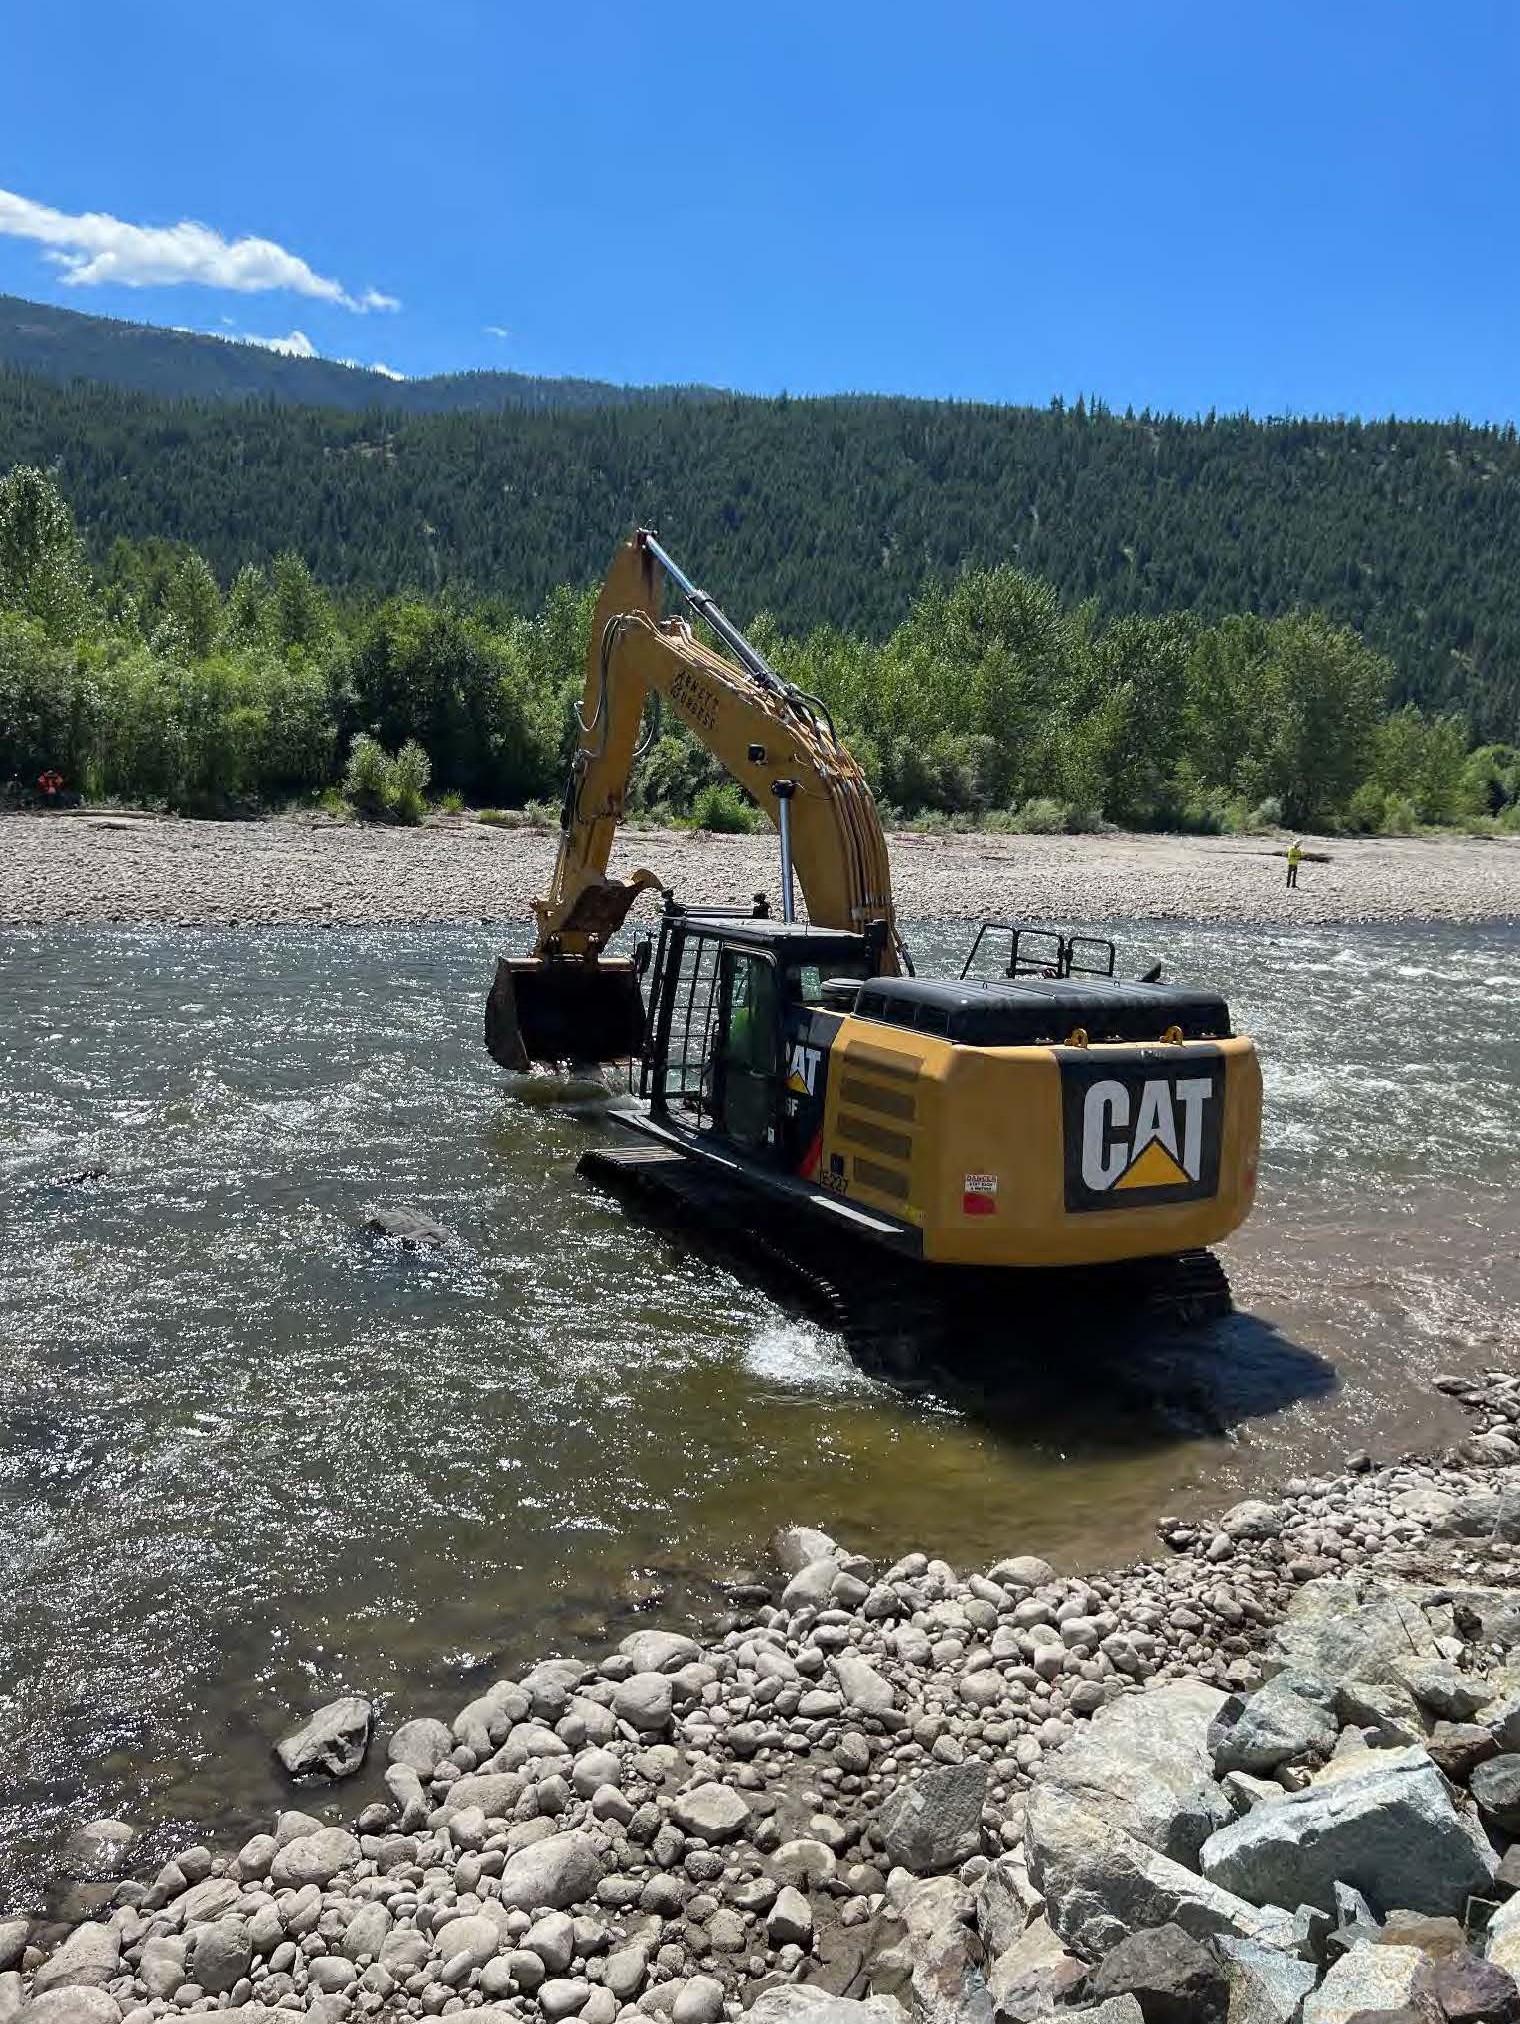 An excavator removes vehicle parts from the Nicola River